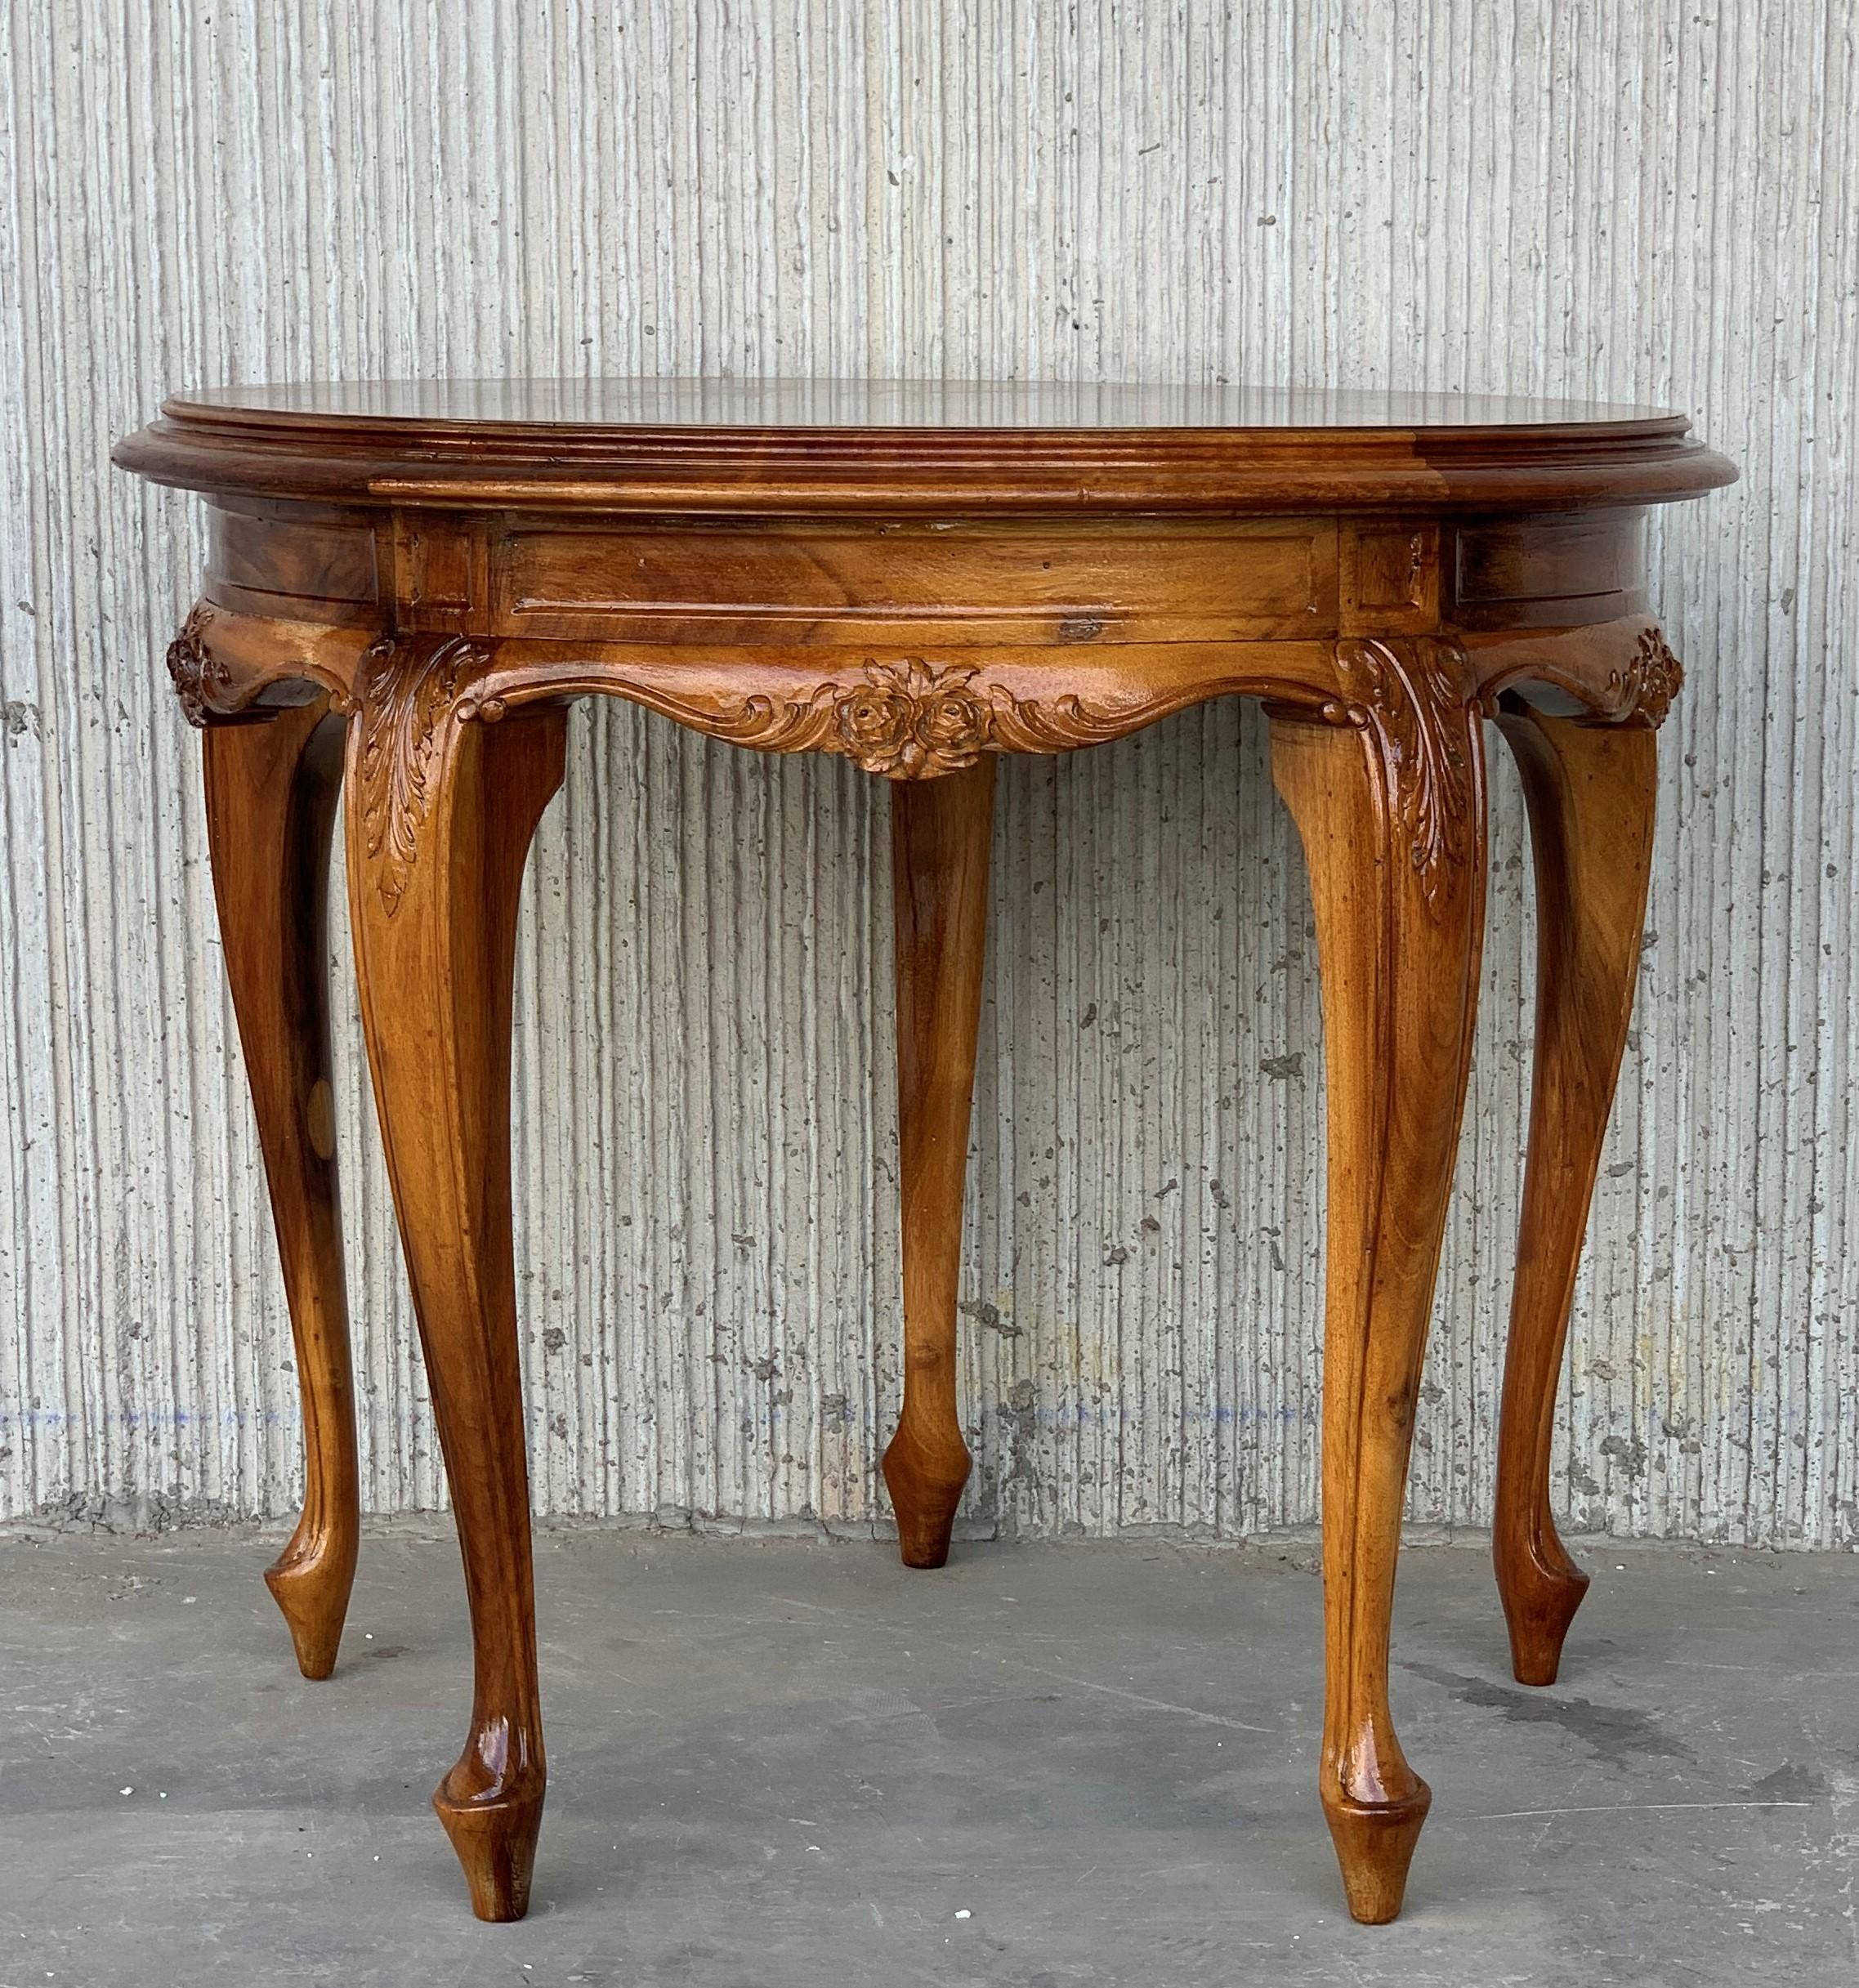 An Italian Rococo style round side table with burl top over a richly carved base from the 20th century. The apron is adorned on all sides with typical Mariano Garcia motifs.
The table is on four cabriole legs with scrolled feet, adorned with